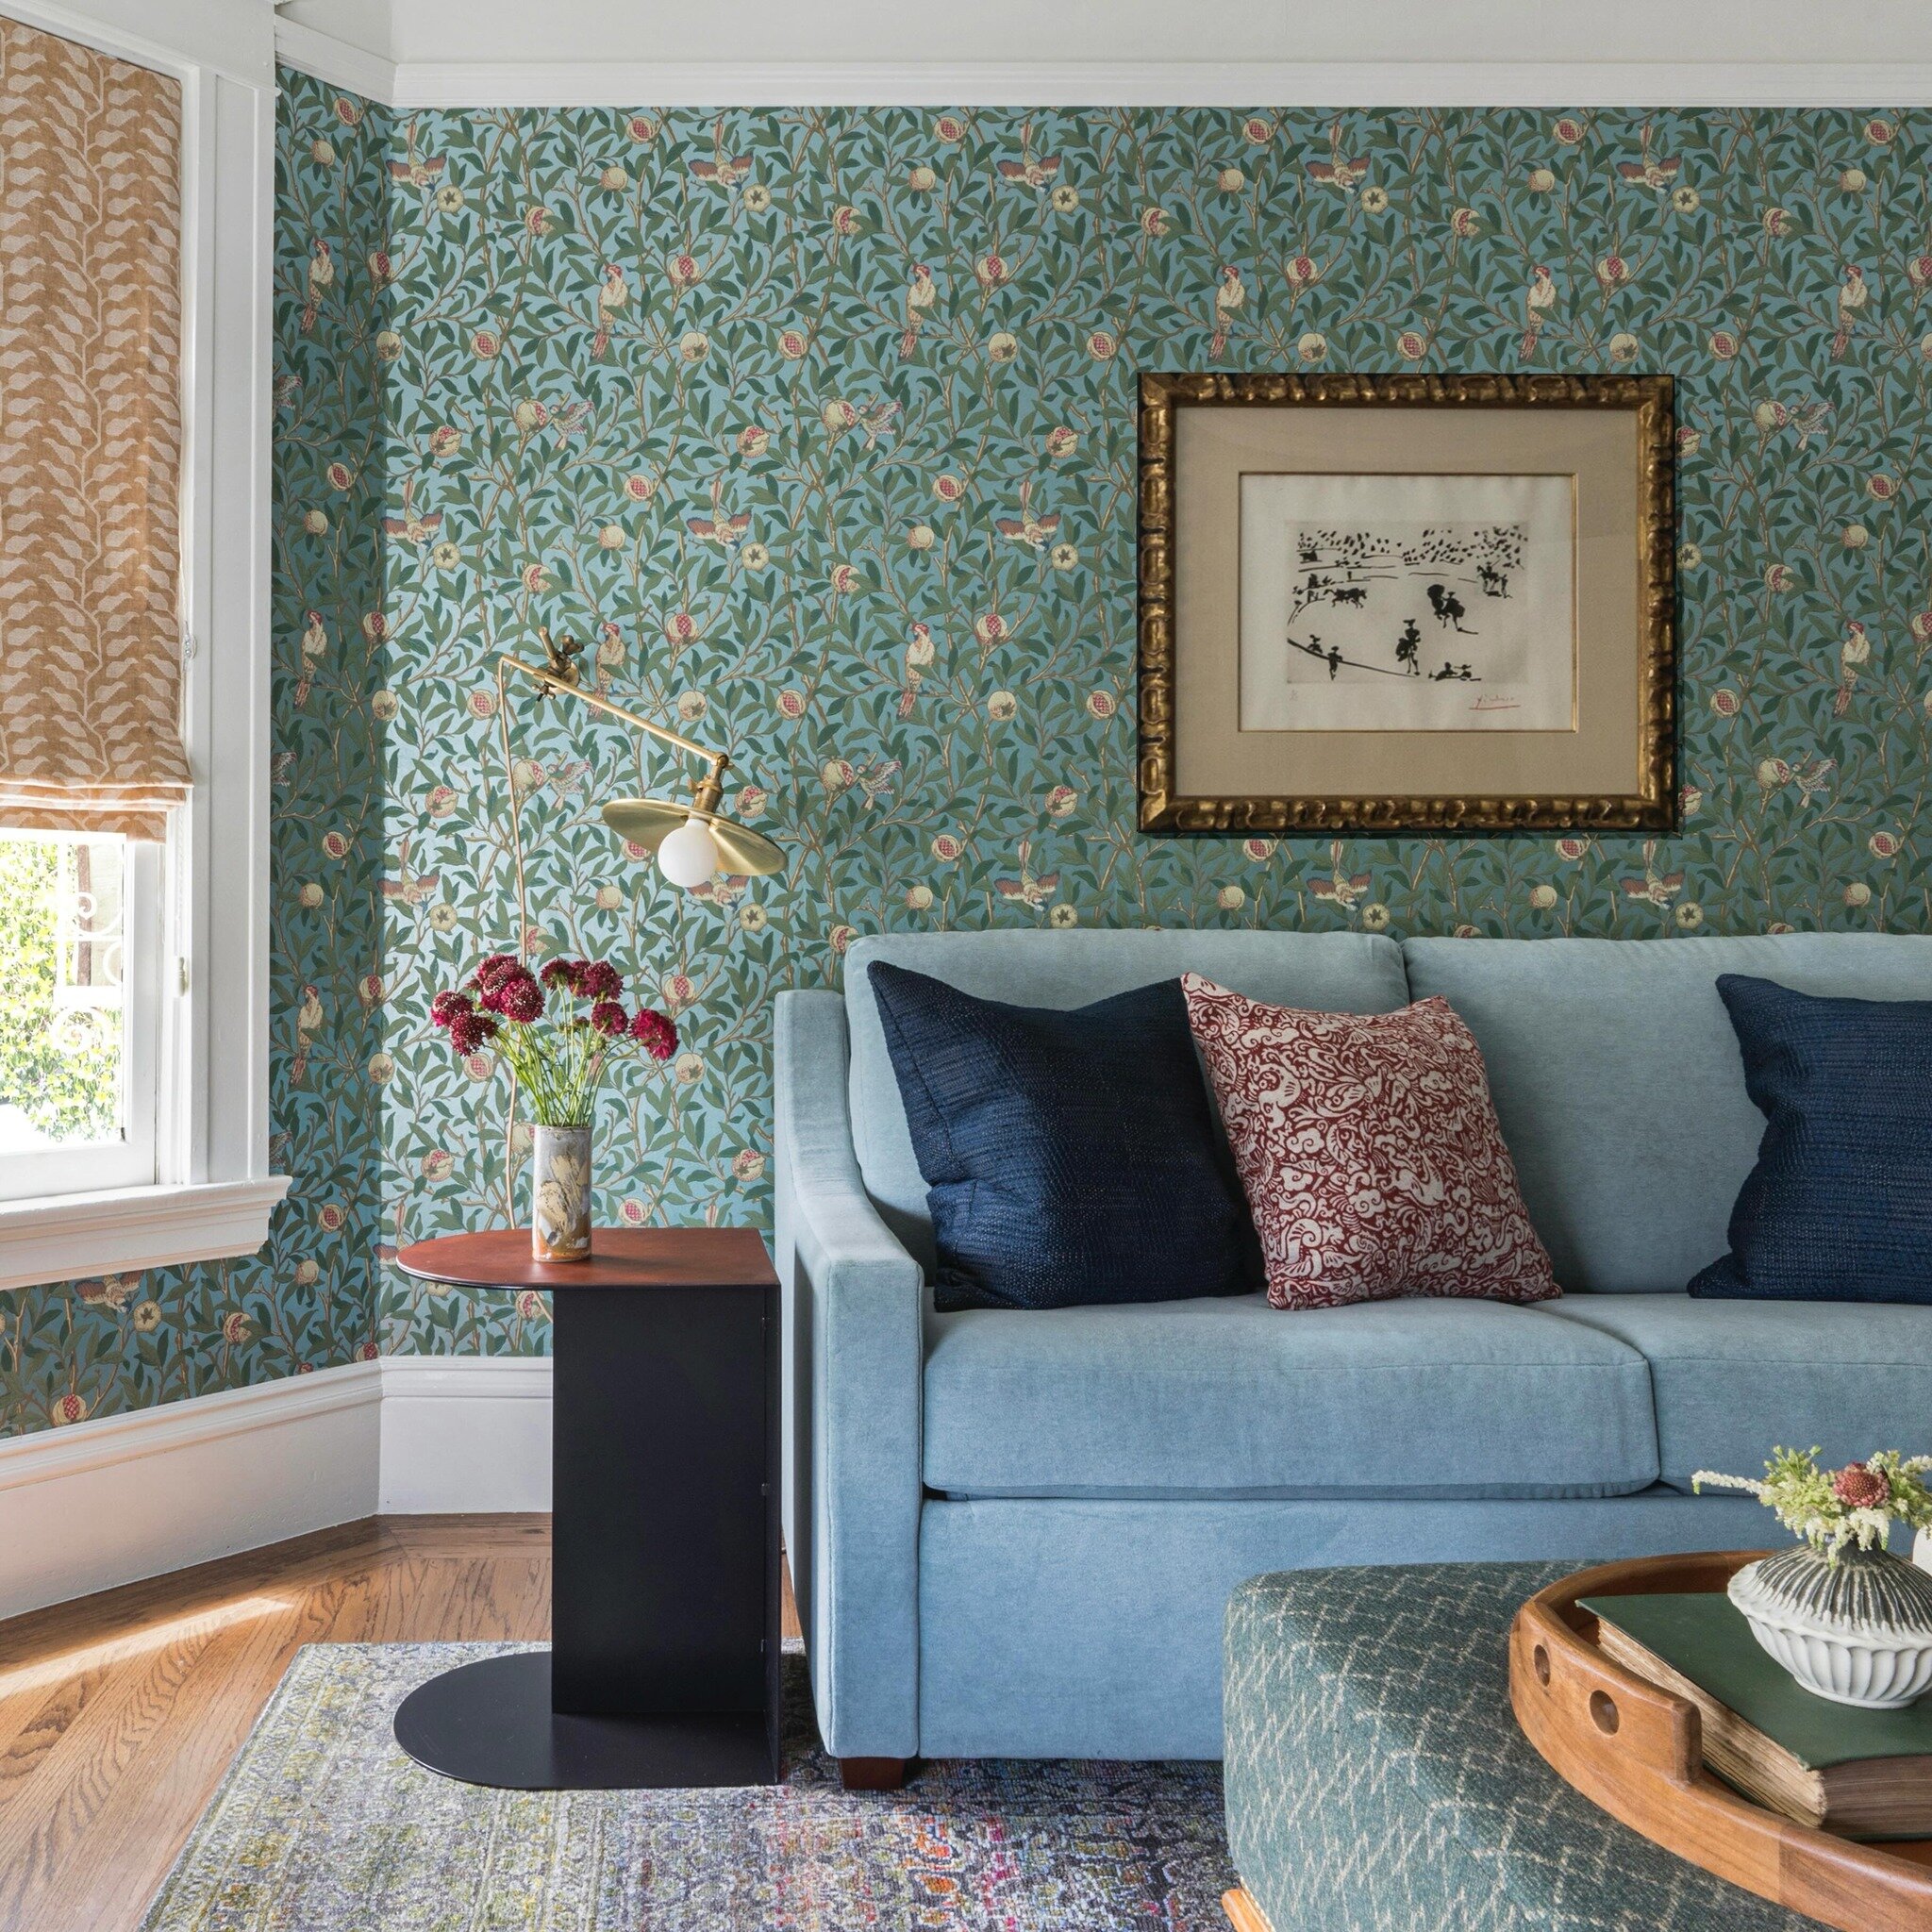 Would love to be in this cozy room on a rainy day like today, curled up on the sofa watching a great romcom 🤍

Interior Design: @florencechouxlivingston 
Photo: @daviddlivingston 
.
.
.
#edwardianhome #sleepersofa #wallpaper #sanfranciscorealestate 